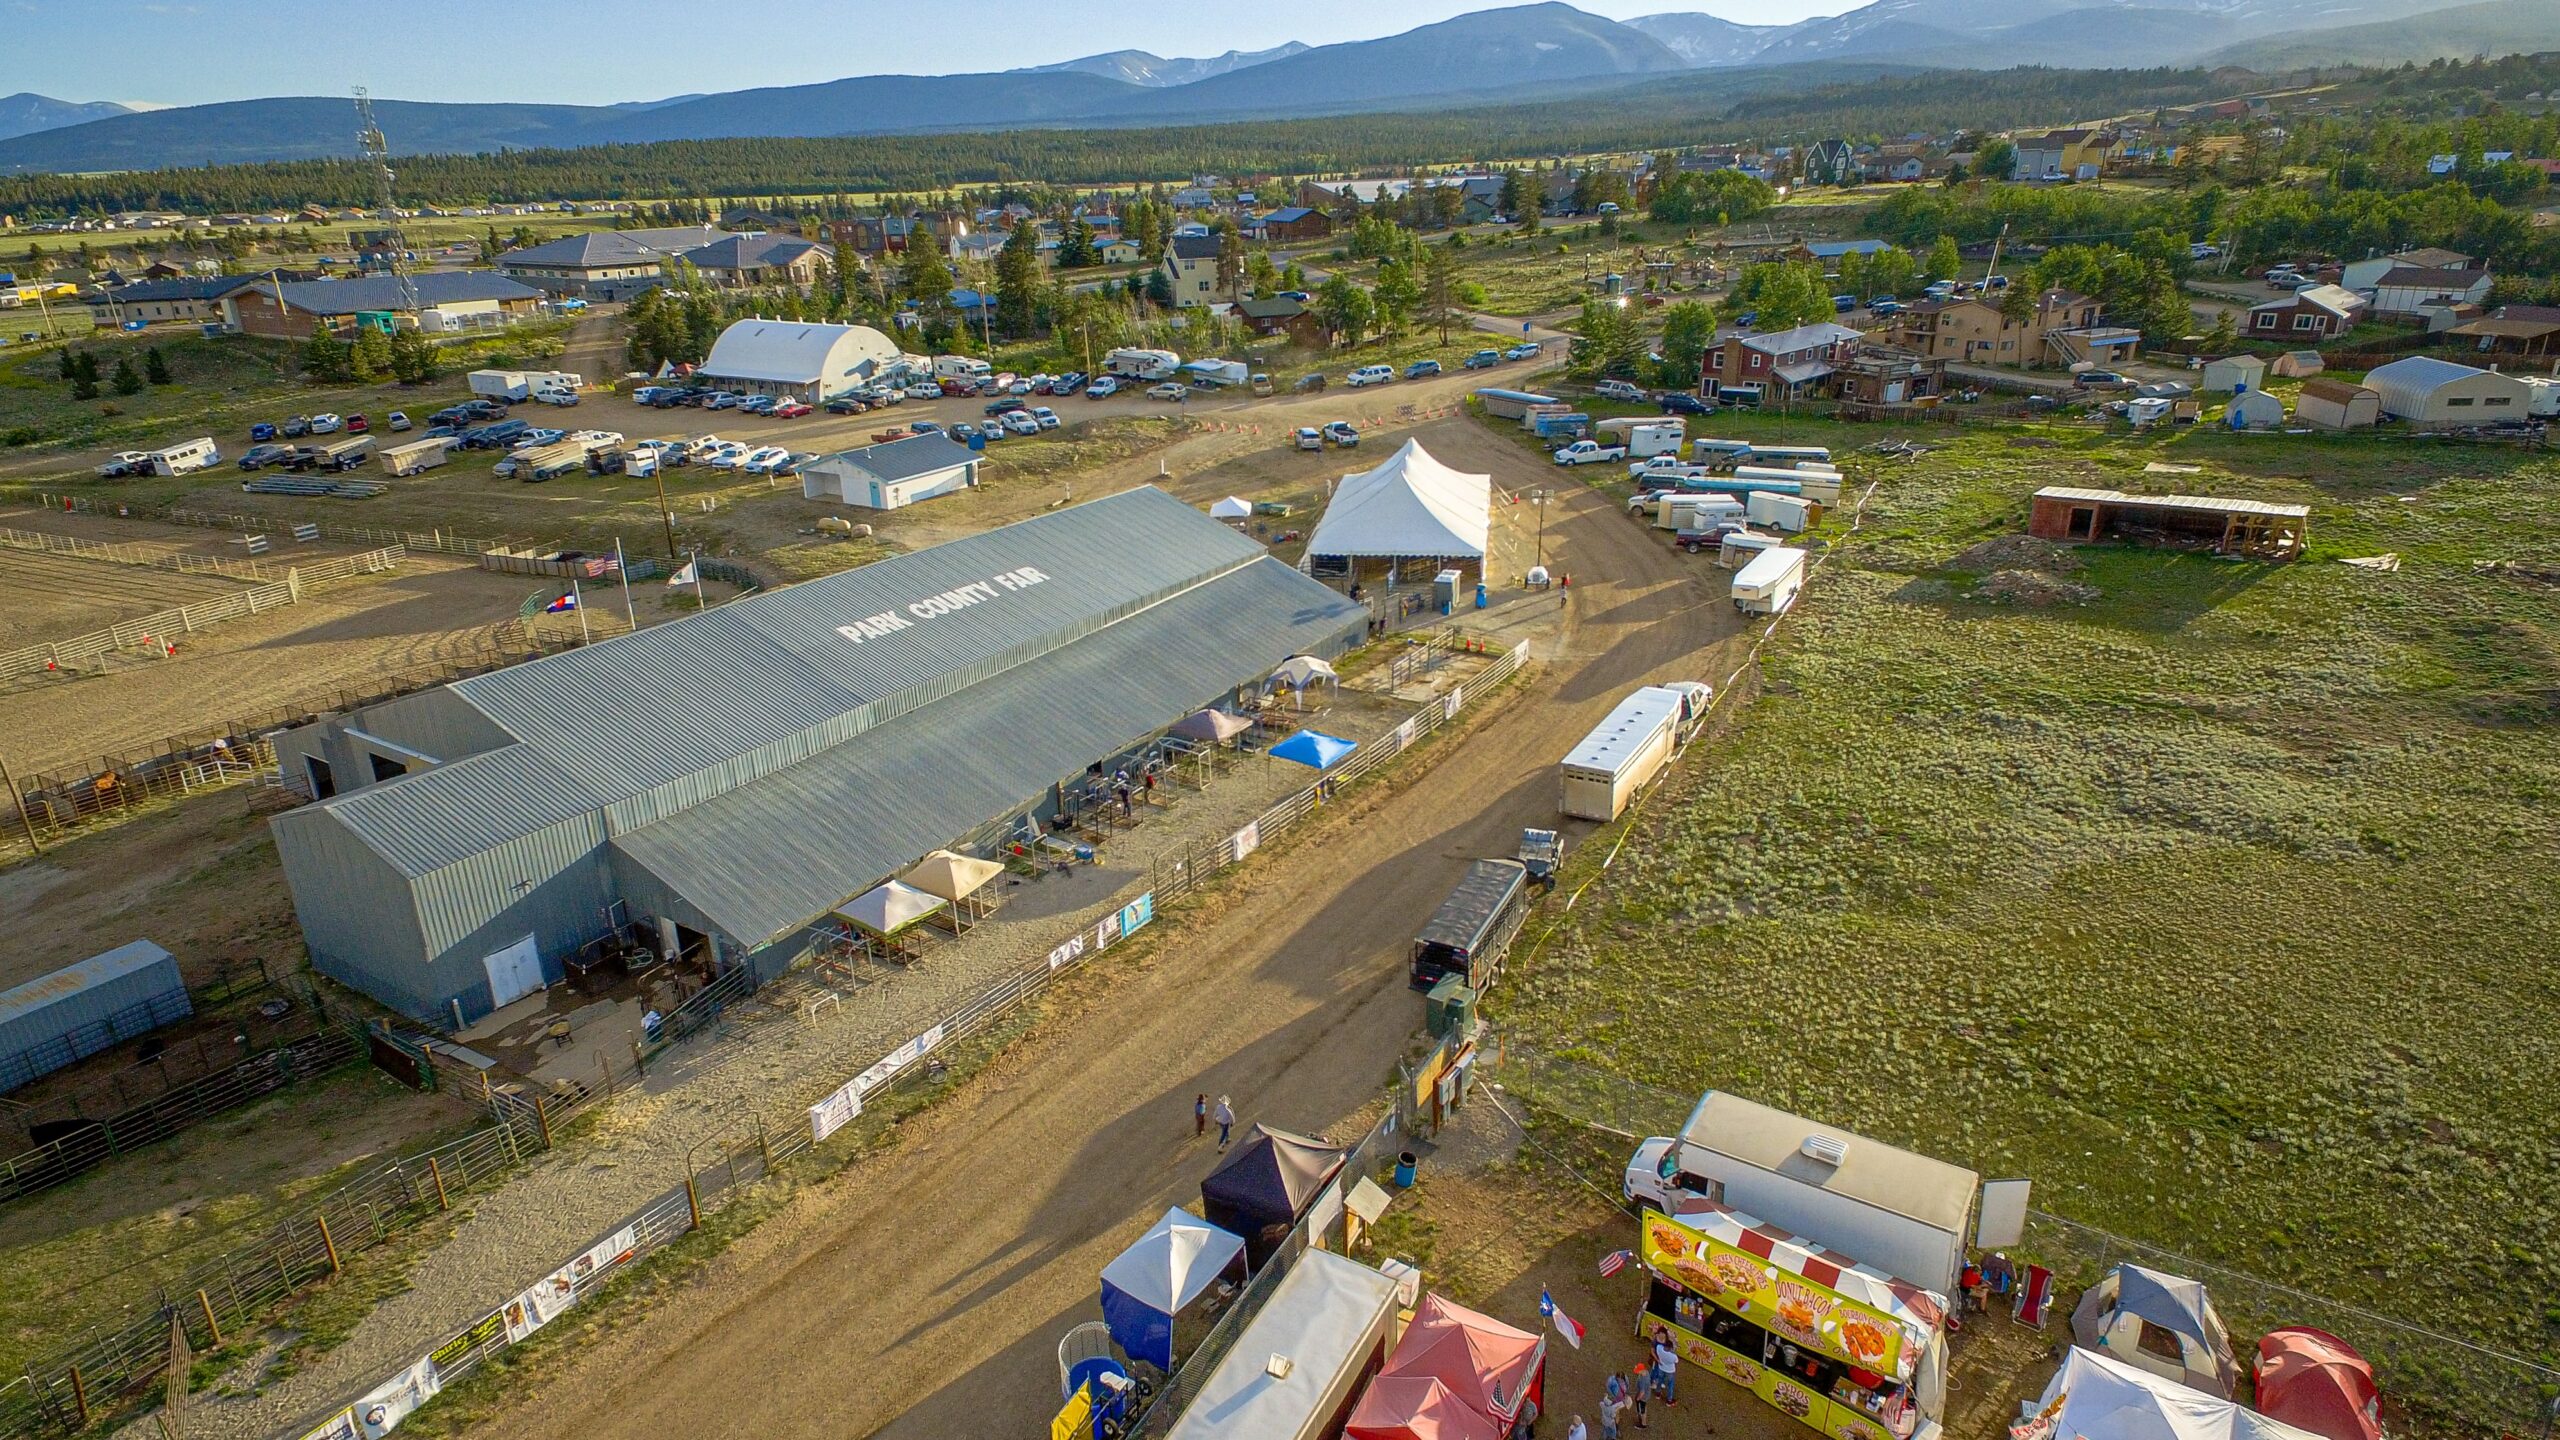 An aerial view of the Park County Fairgrounds in Fairplay Colorado